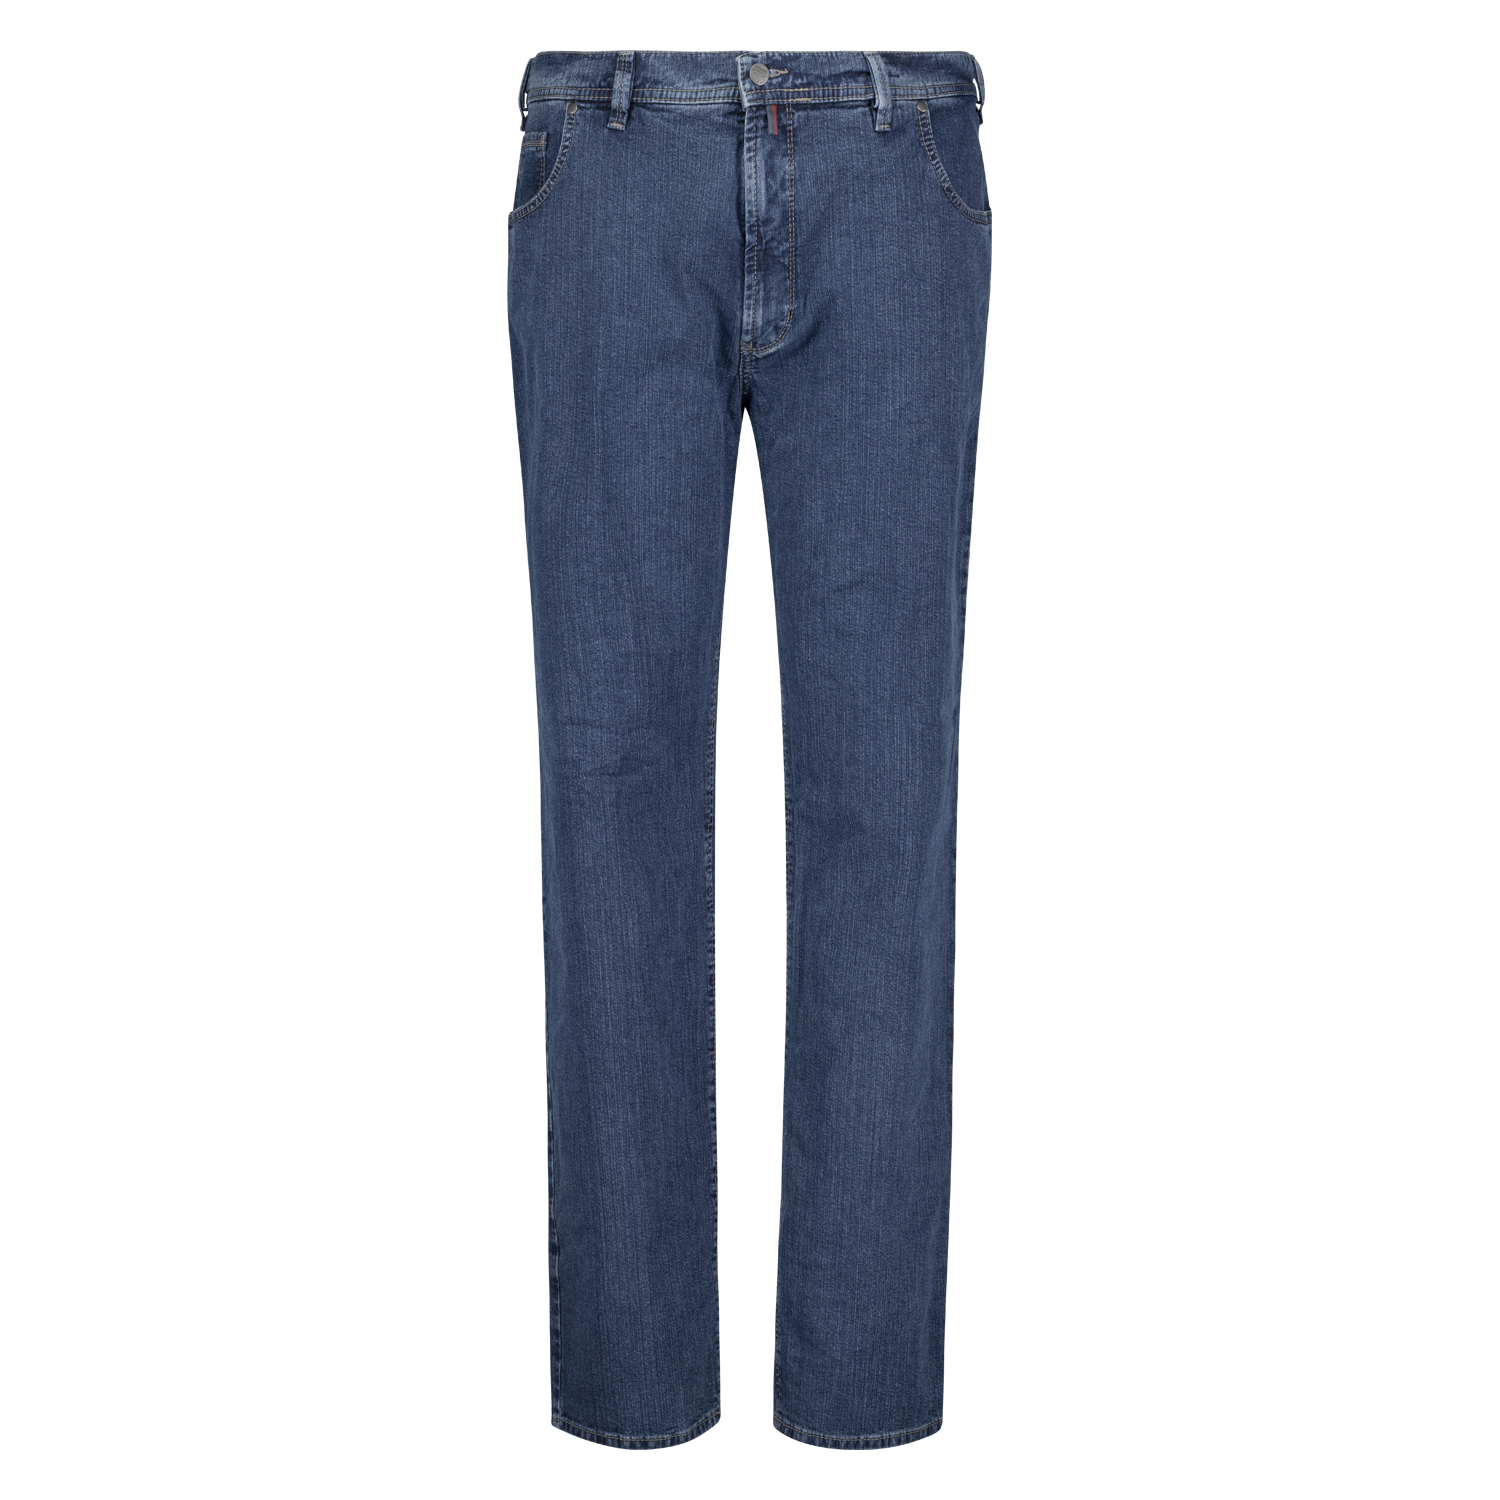 5-Pocket Jeans homme avec stretch "Peter" blue stonewash by Pioneer grandes tailles (Taille normale): 56 - 74